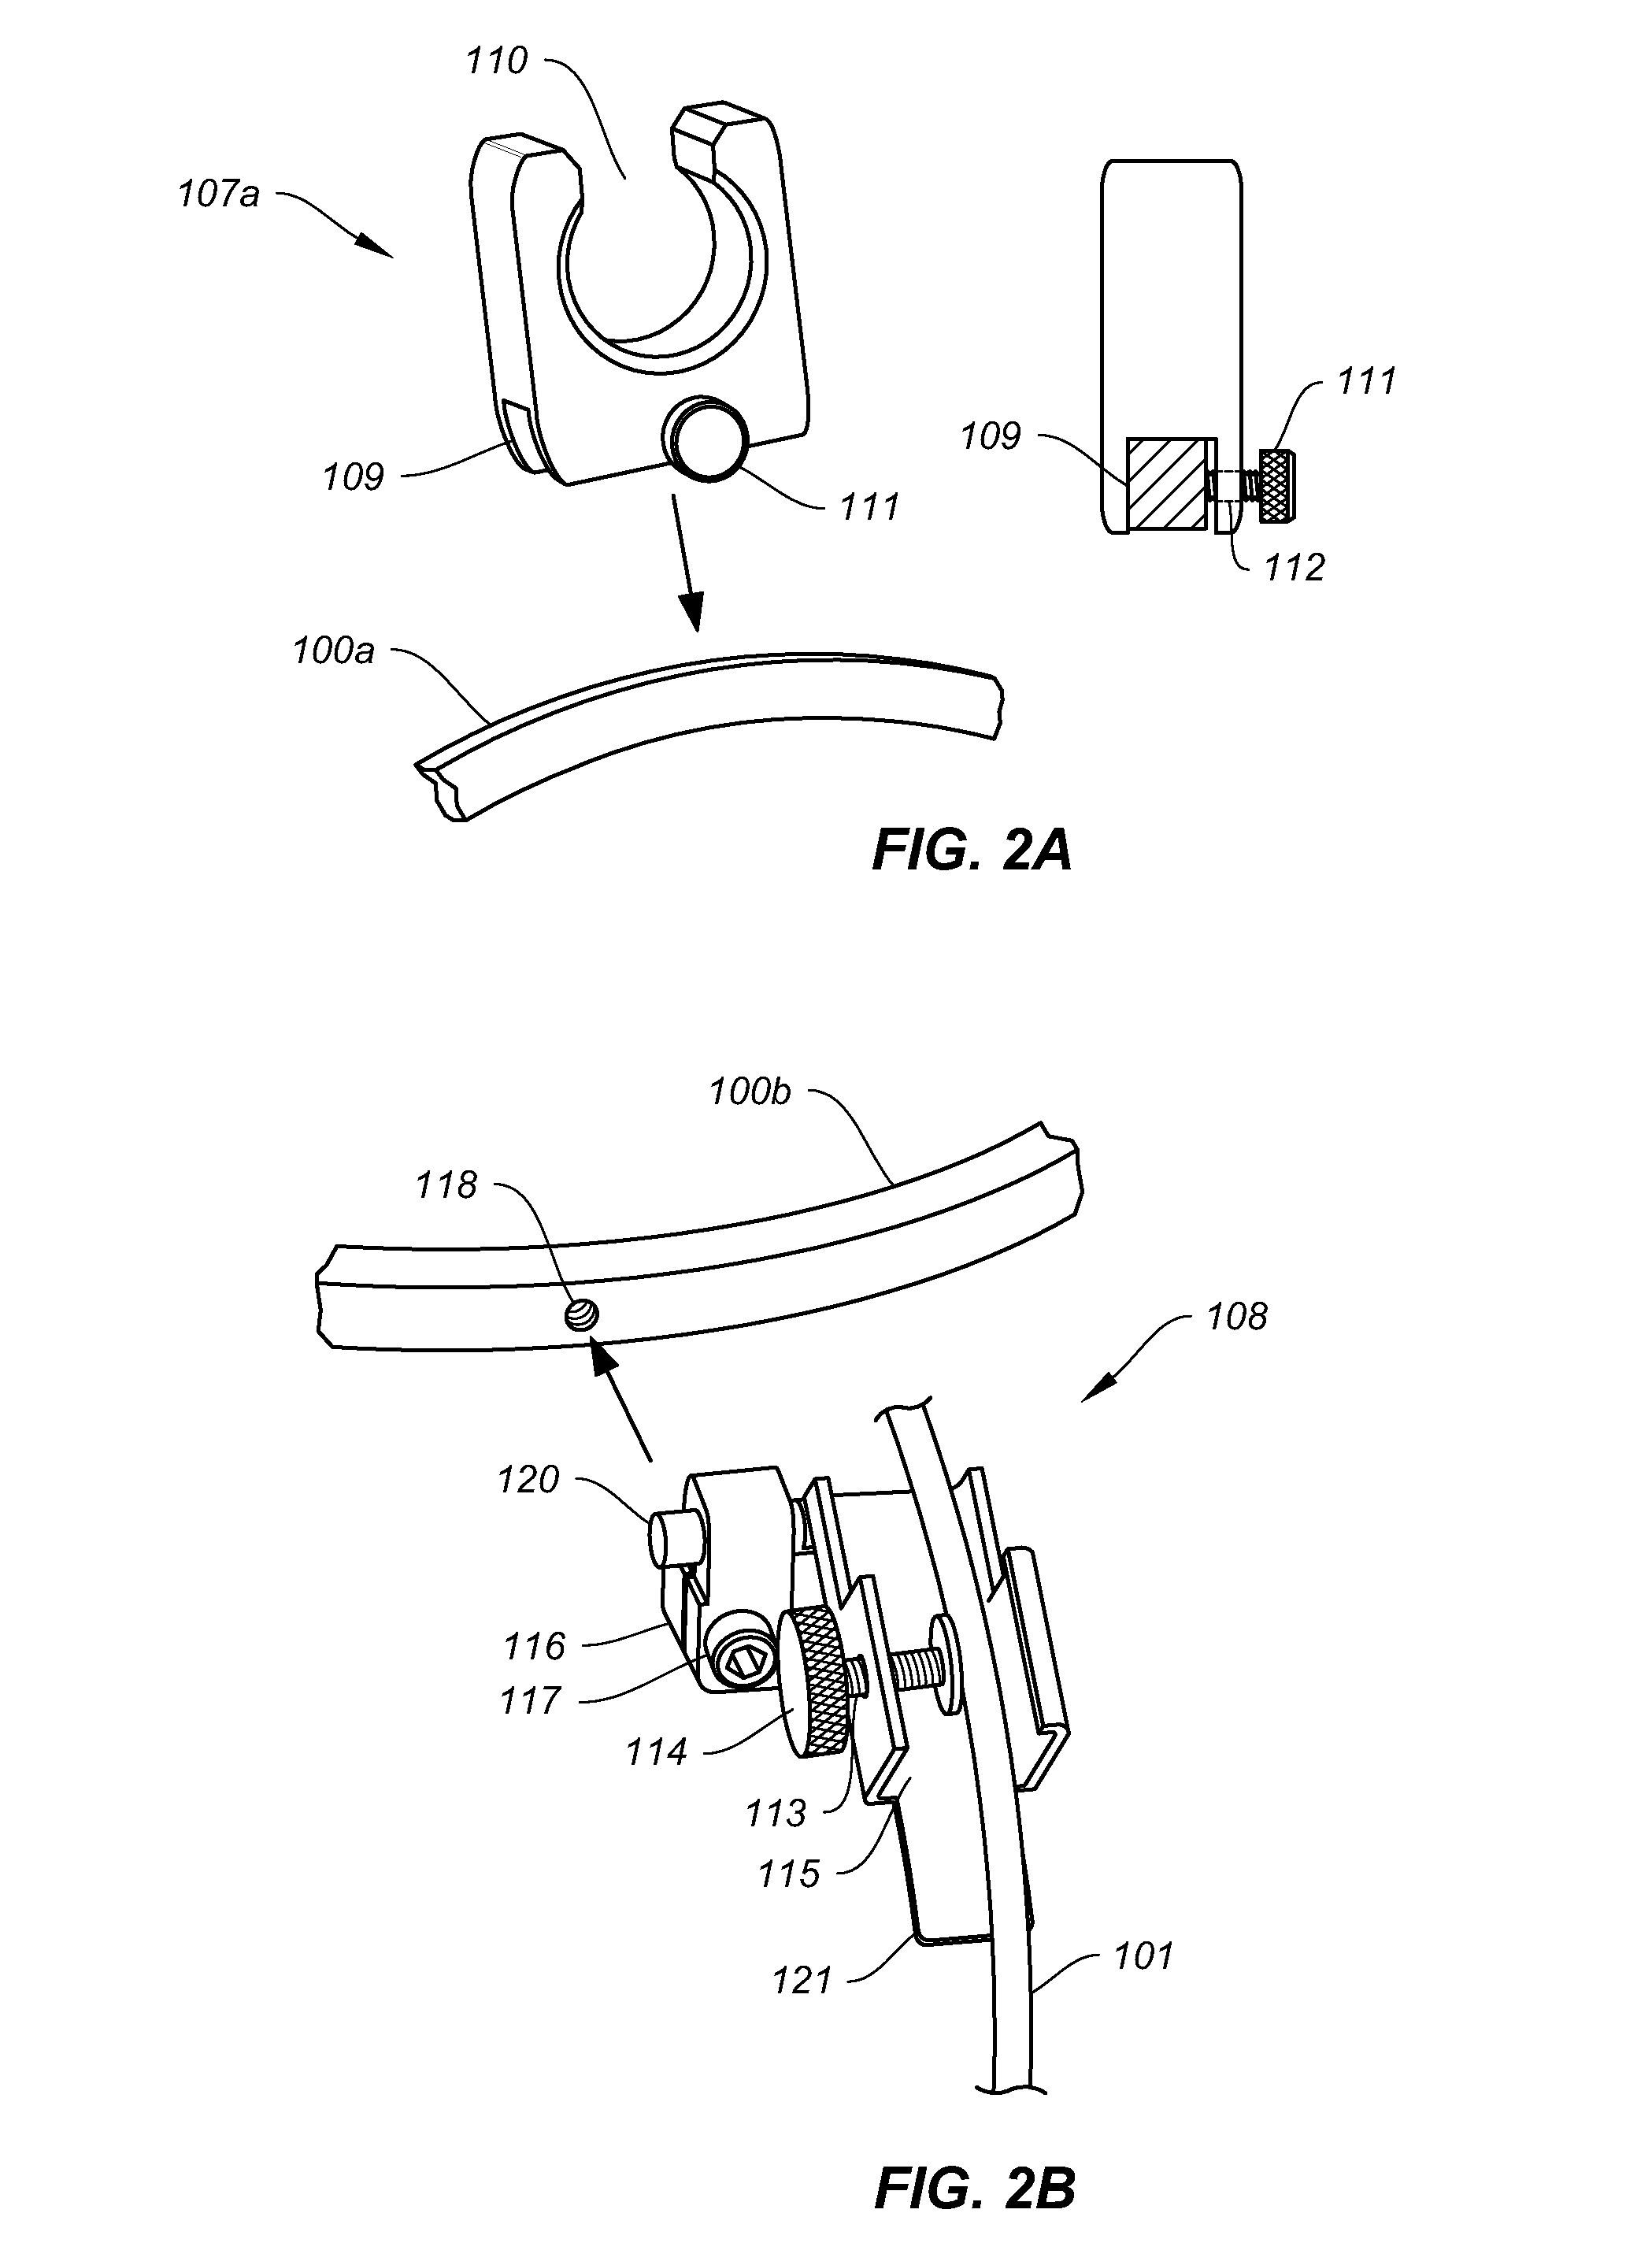 Apparatus and method for oral and maxillofacial surgery and preoperative modeling